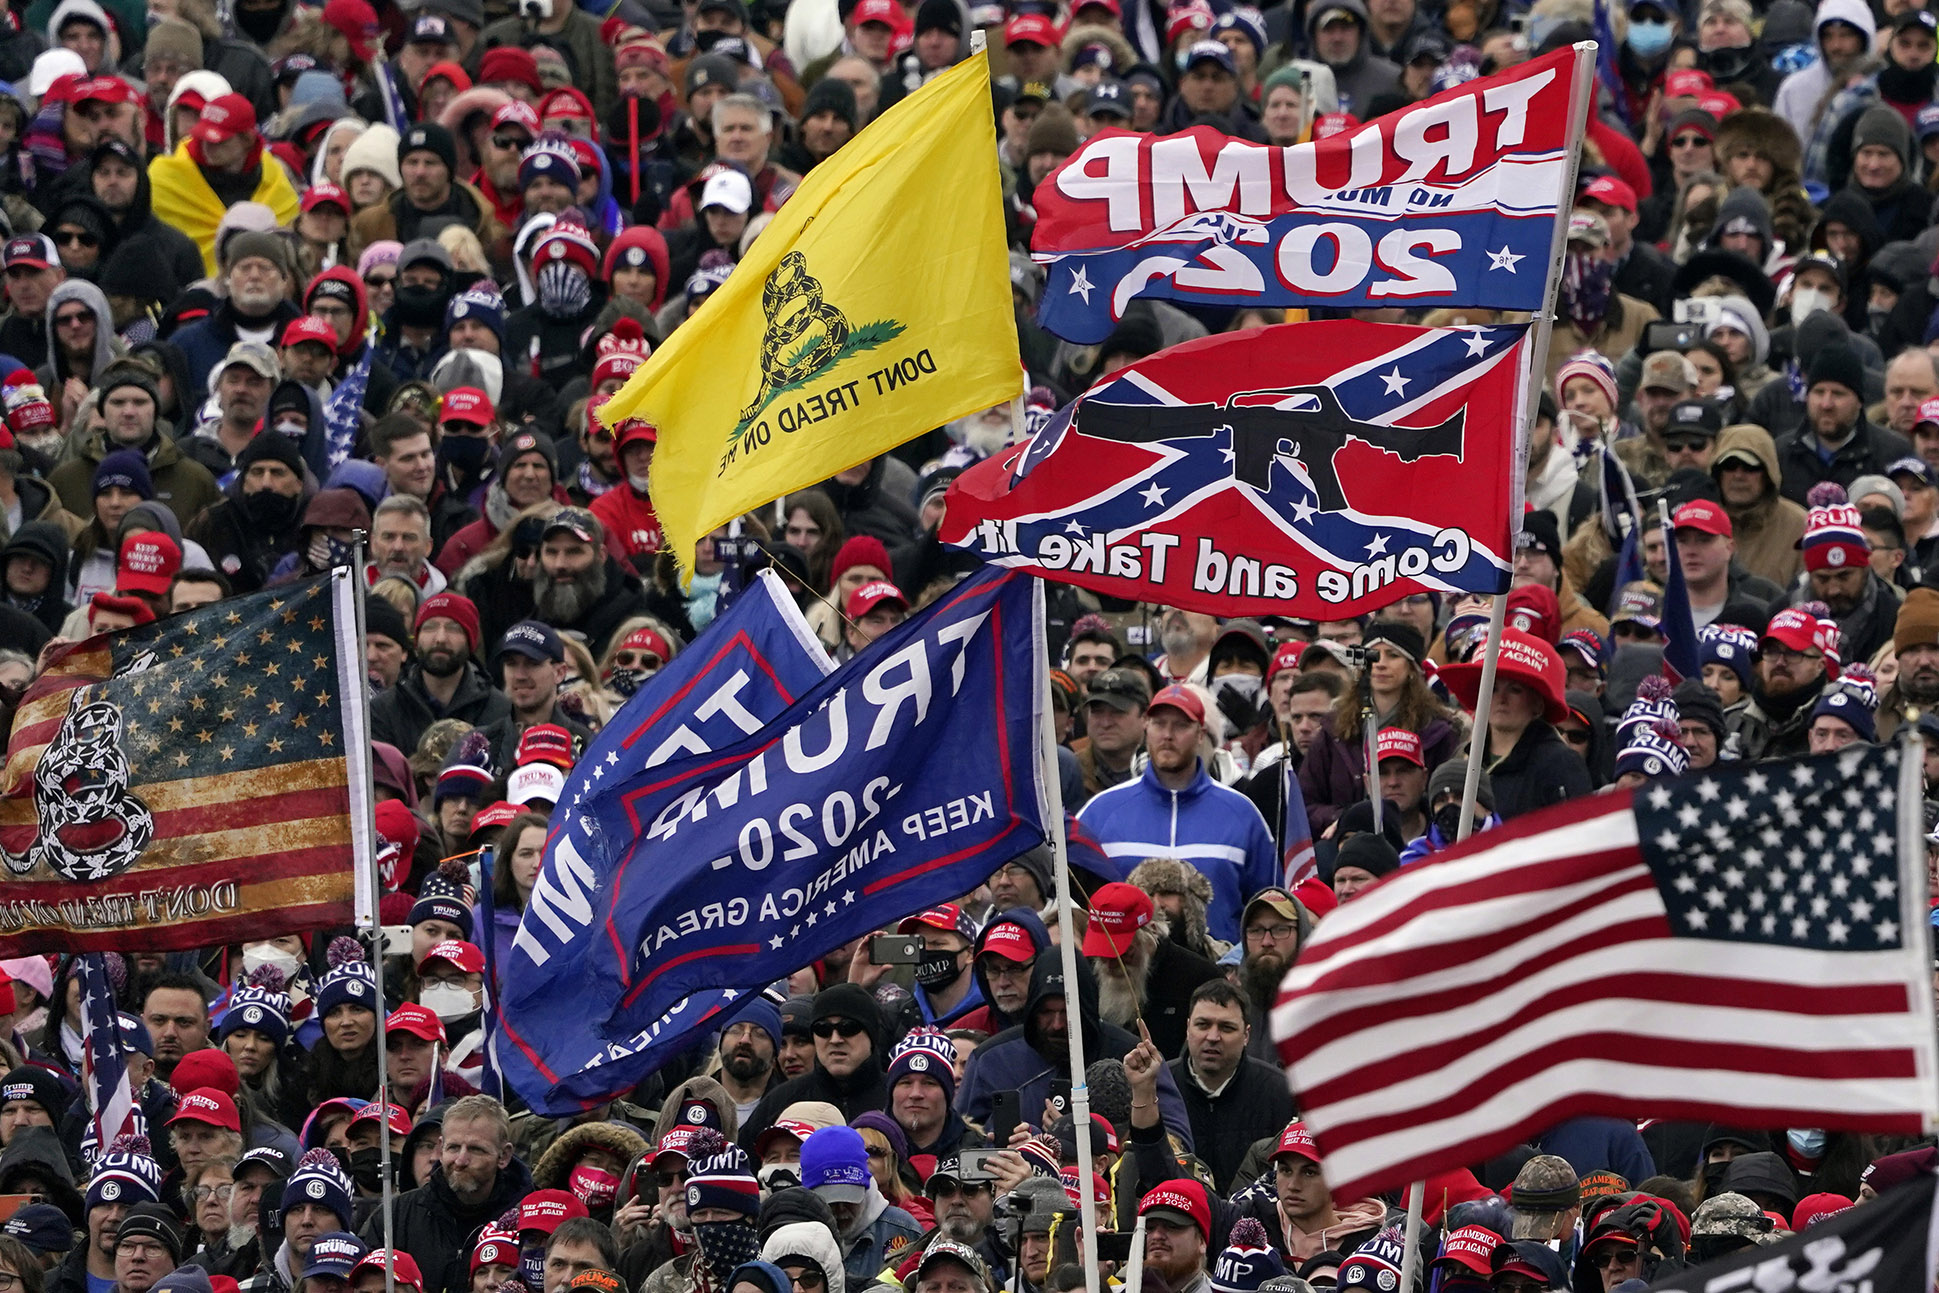 FILE In this Wednesday, Jan. 6, 2021, file photo, supporters listen as President Donald Trump speaks as a Confederate-themed and other flags flutter in the wind during a rally in Washington. War-like imagery has begun to take hold in mainstream Republican political circles in the wake of the deadly attack on the U.S. Capitol, with some elected officials and party leaders rejecting calls to tone down their rhetoric contemplating a second civil war. (AP Photo/Evan Vucci, File)